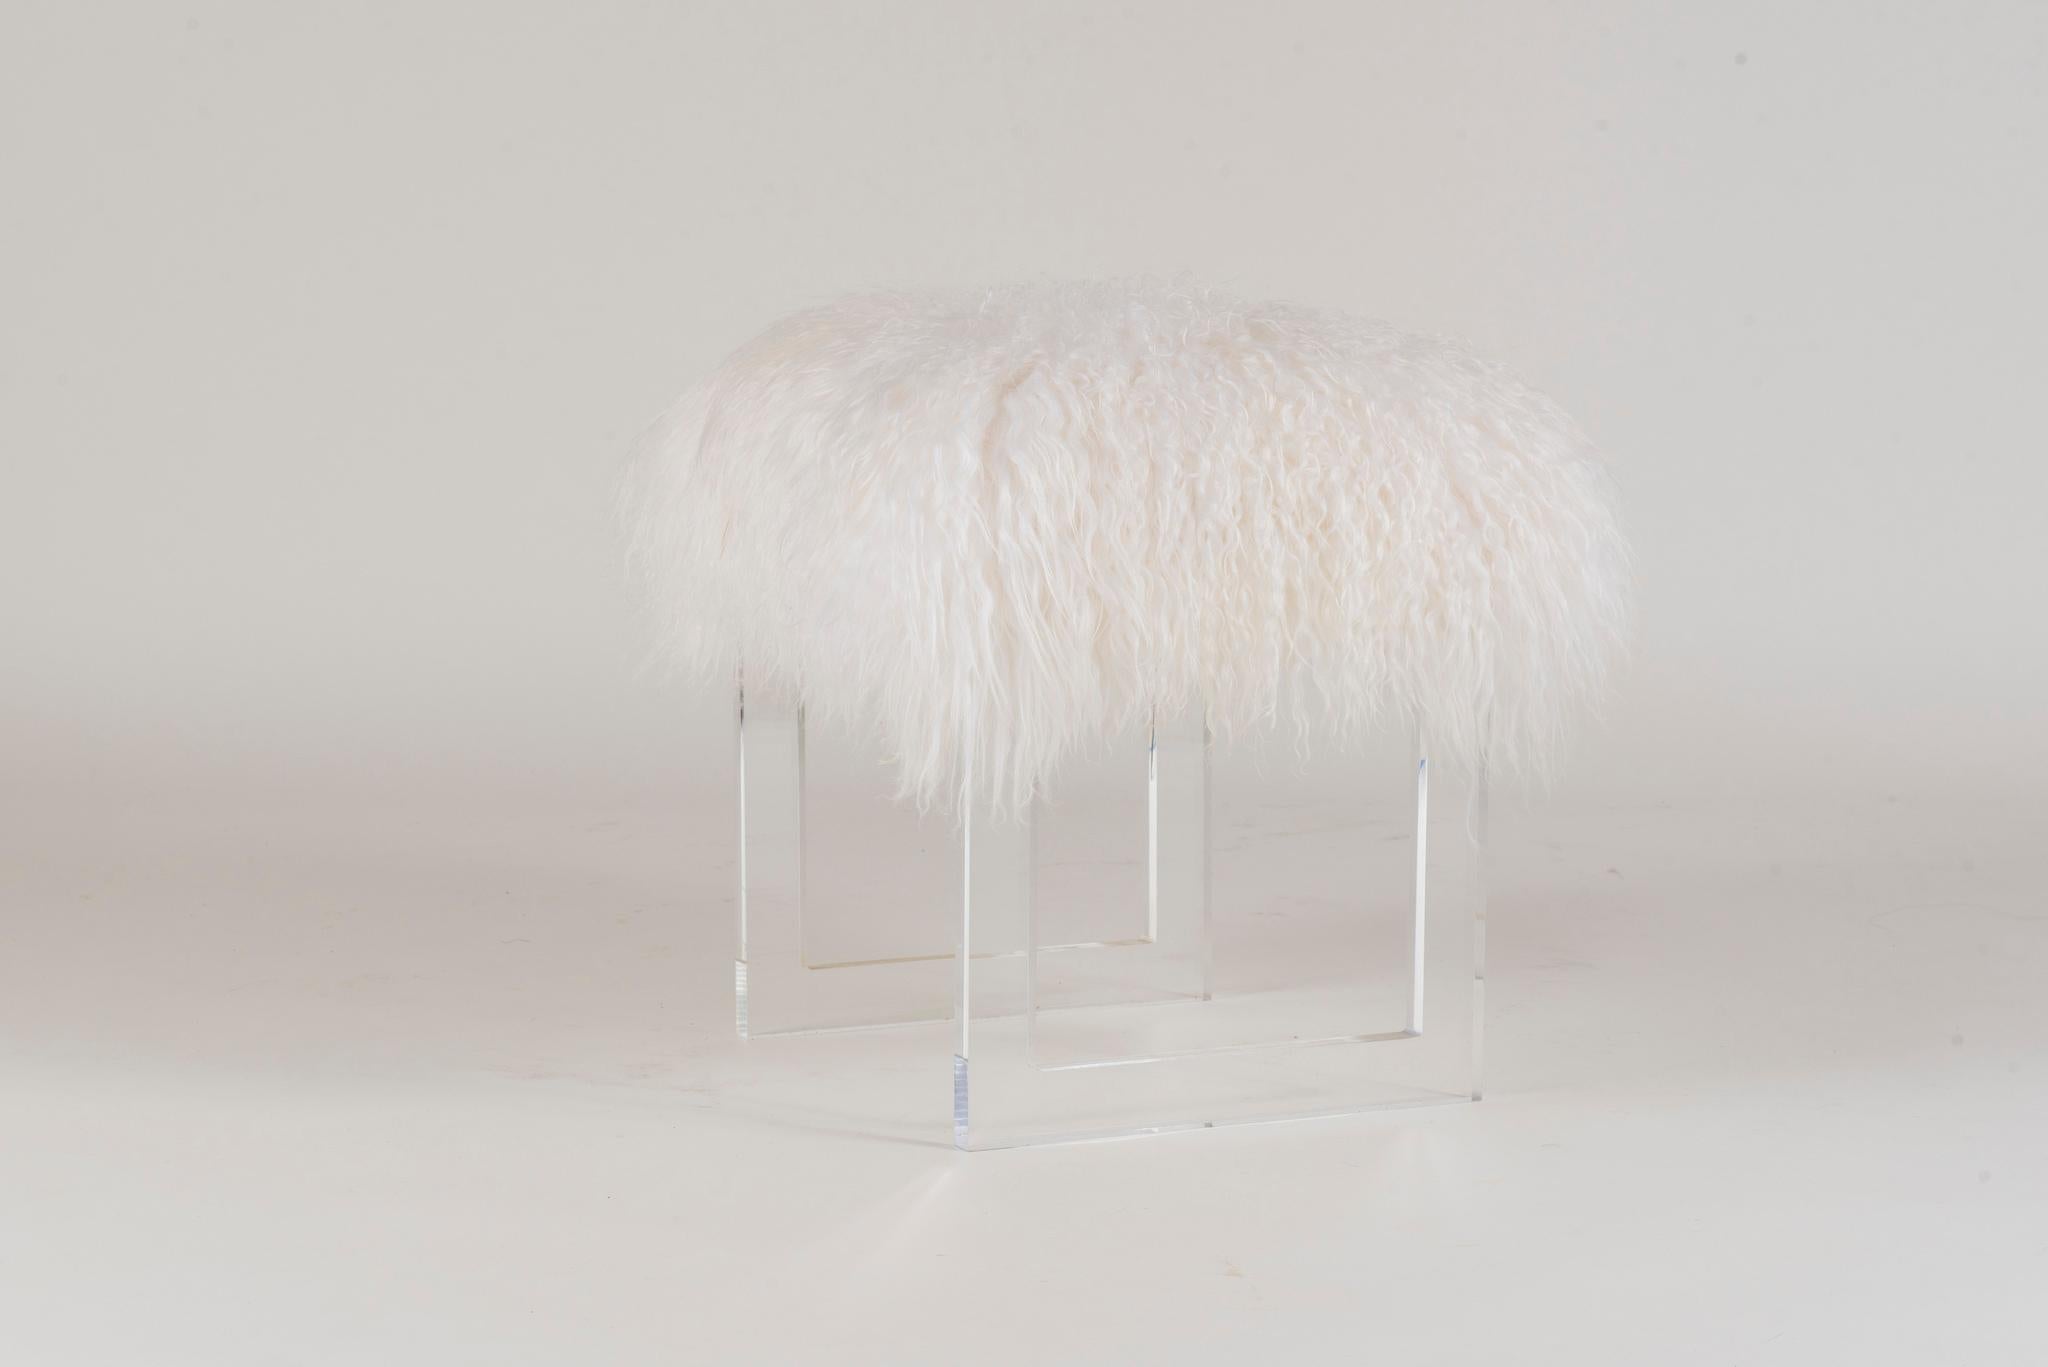 A custom longhair Icelandic woolly sheepskin Lucite bench.

Dimensions shown are of frame structure and do not include the poufing of the fur.

Measures: Finished frame is 20